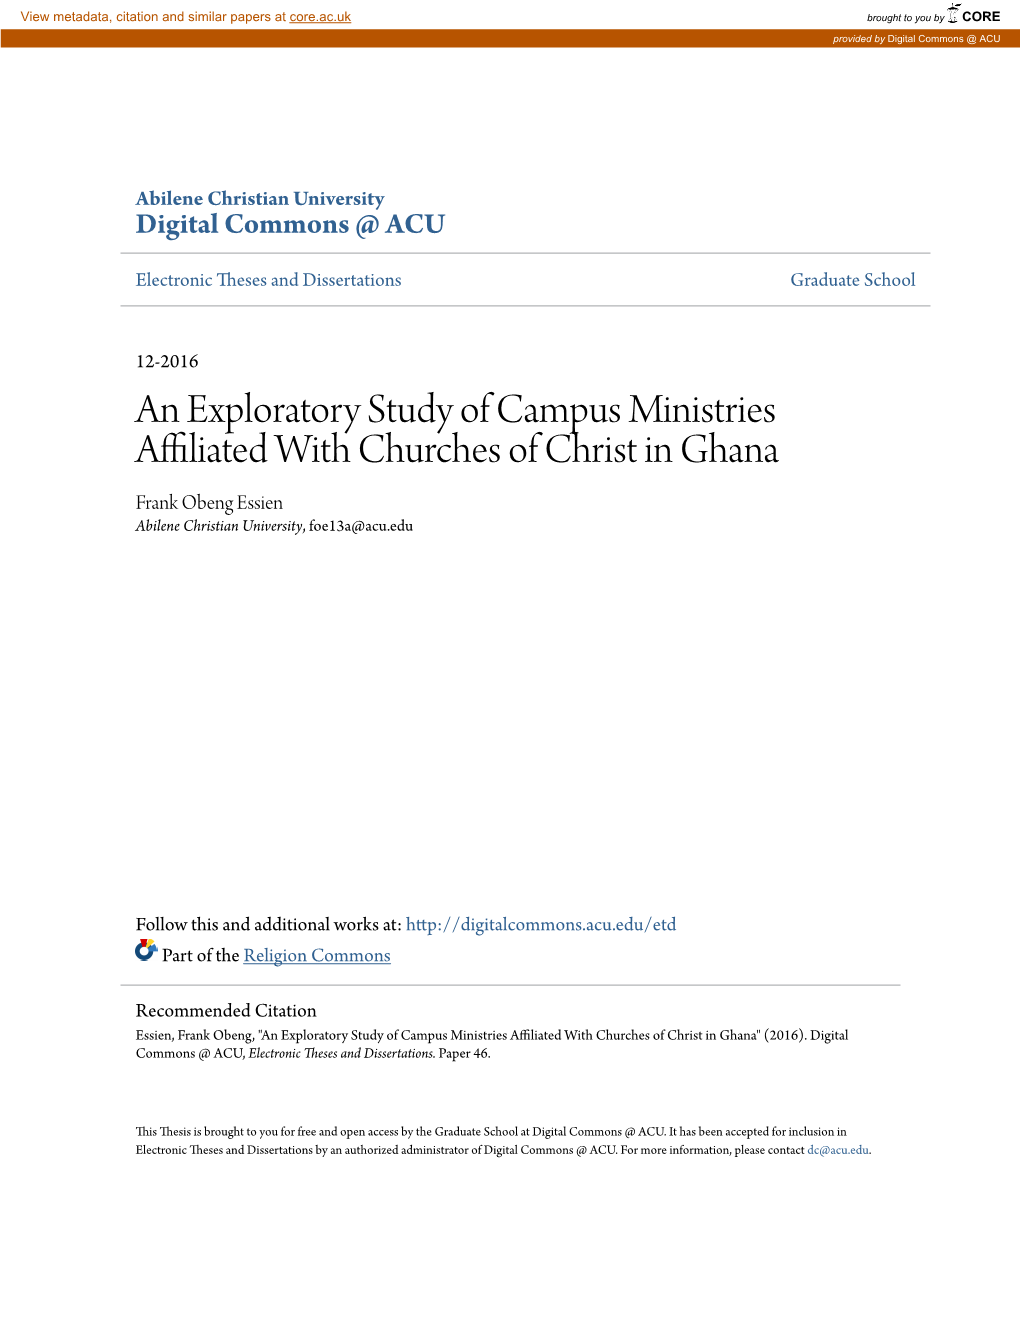 An Exploratory Study of Campus Ministries Affiliated with Churches of Christ in Ghana Frank Obeng Essien Abilene Christian University, Foe13a@Acu.Edu